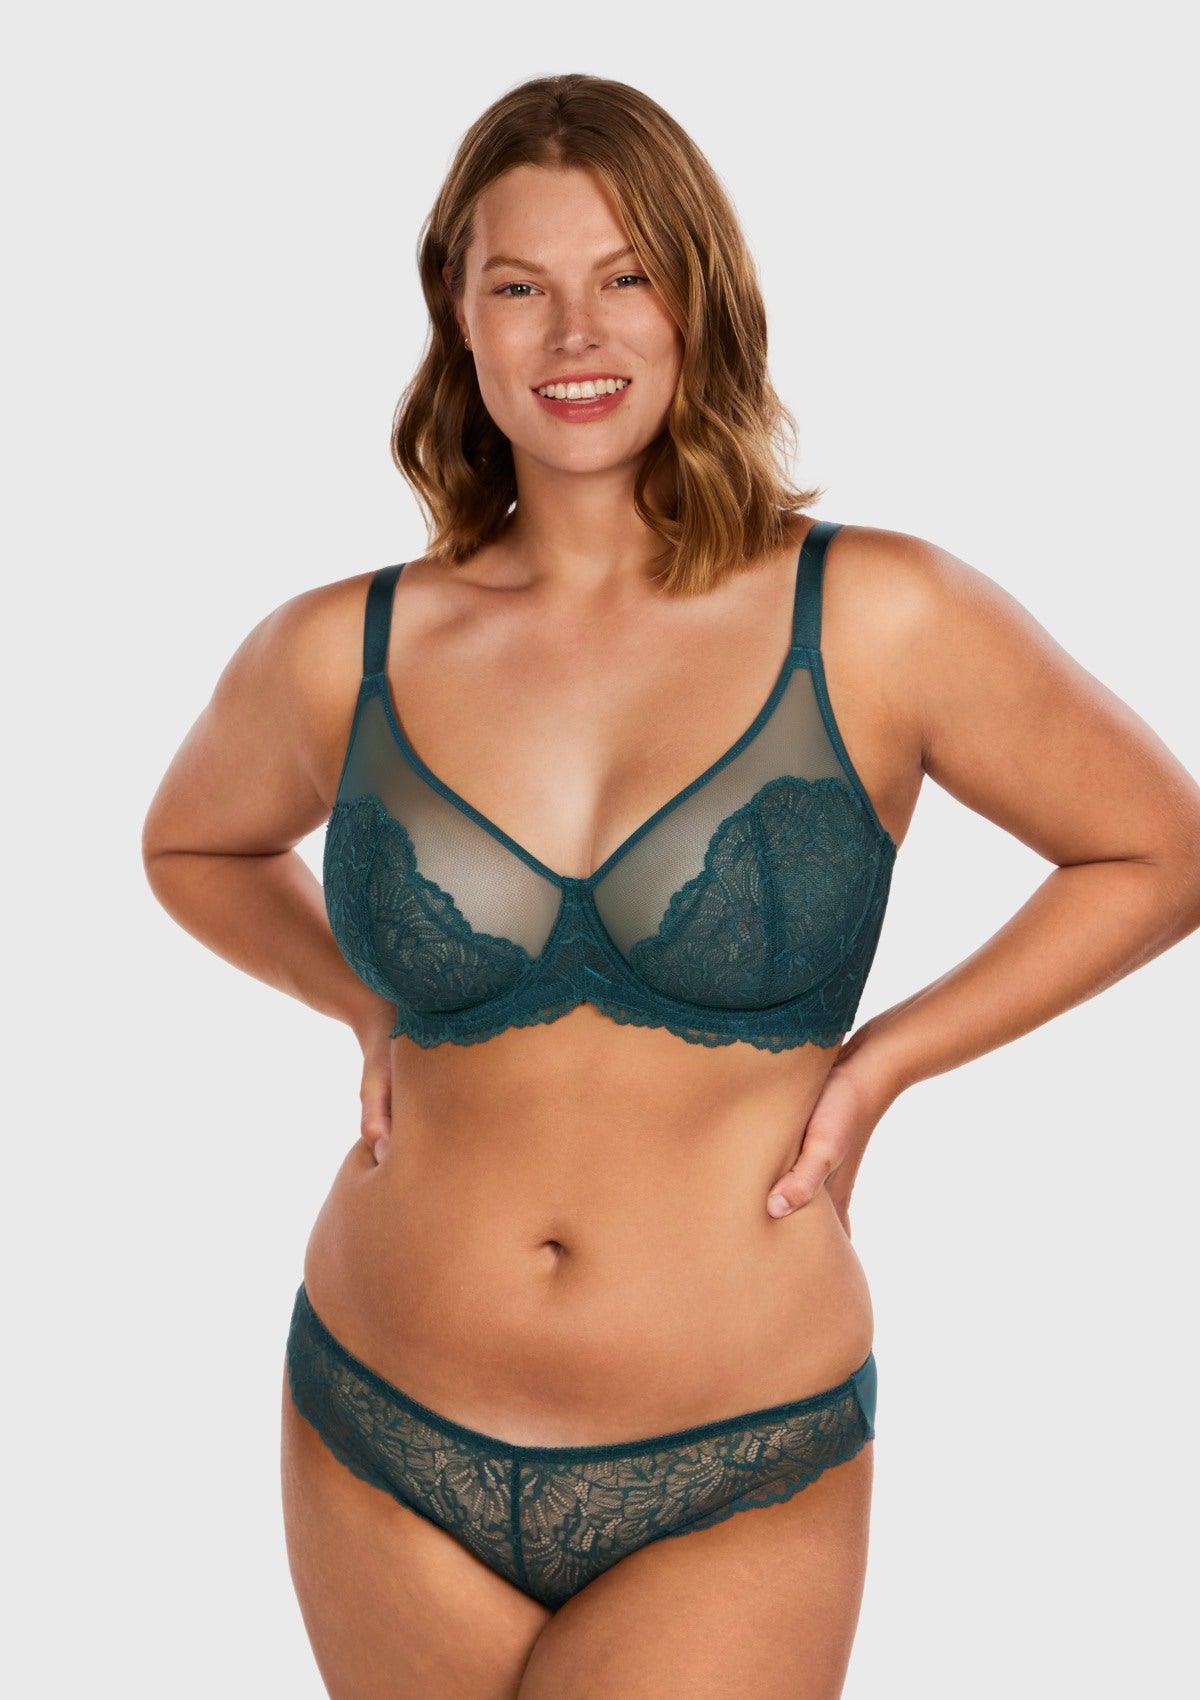 HSIA Blossom Full Figure See-Through Lace Bra For Side And Back Fat - Balsam Blue / 42 / D